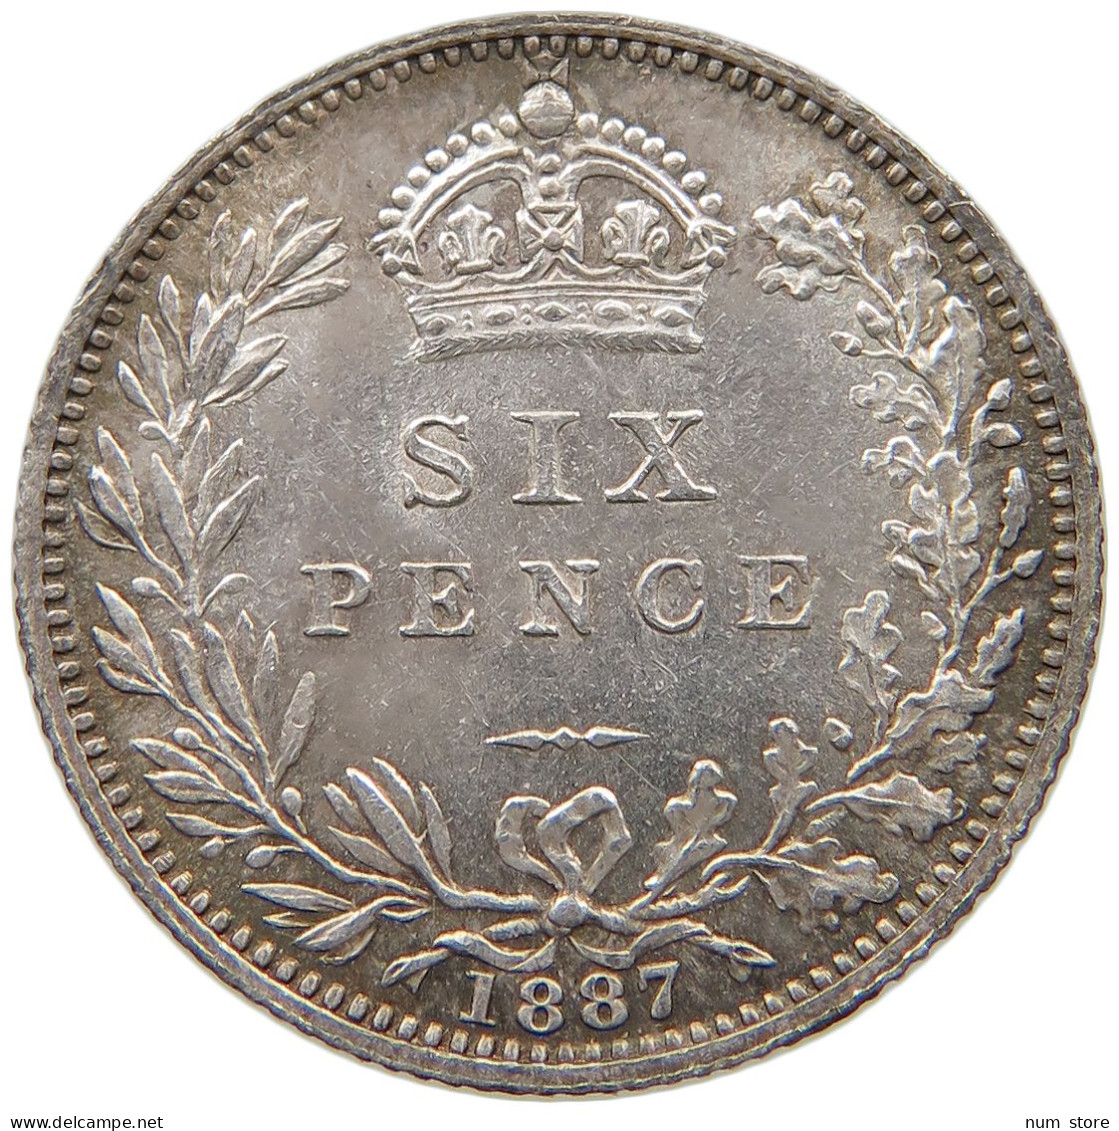 GREAT BRITAIN SIXPENCE 1887 Victoria 1837-1901 #t139 0229 - H. 6 Pence